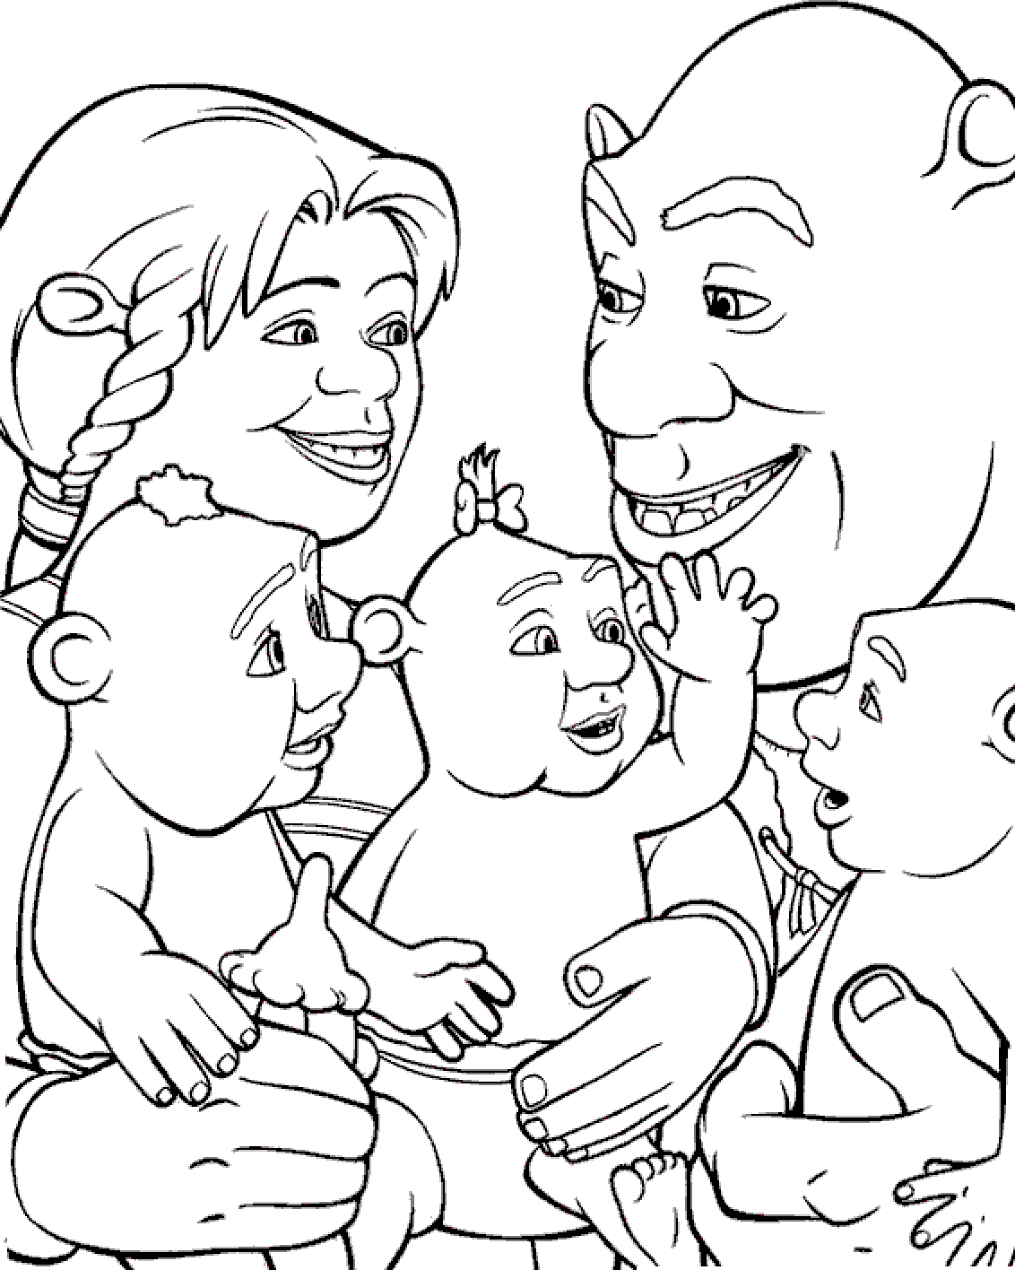 Family Of Shrek Coloring Page Free Printable Coloring Pages for Kids